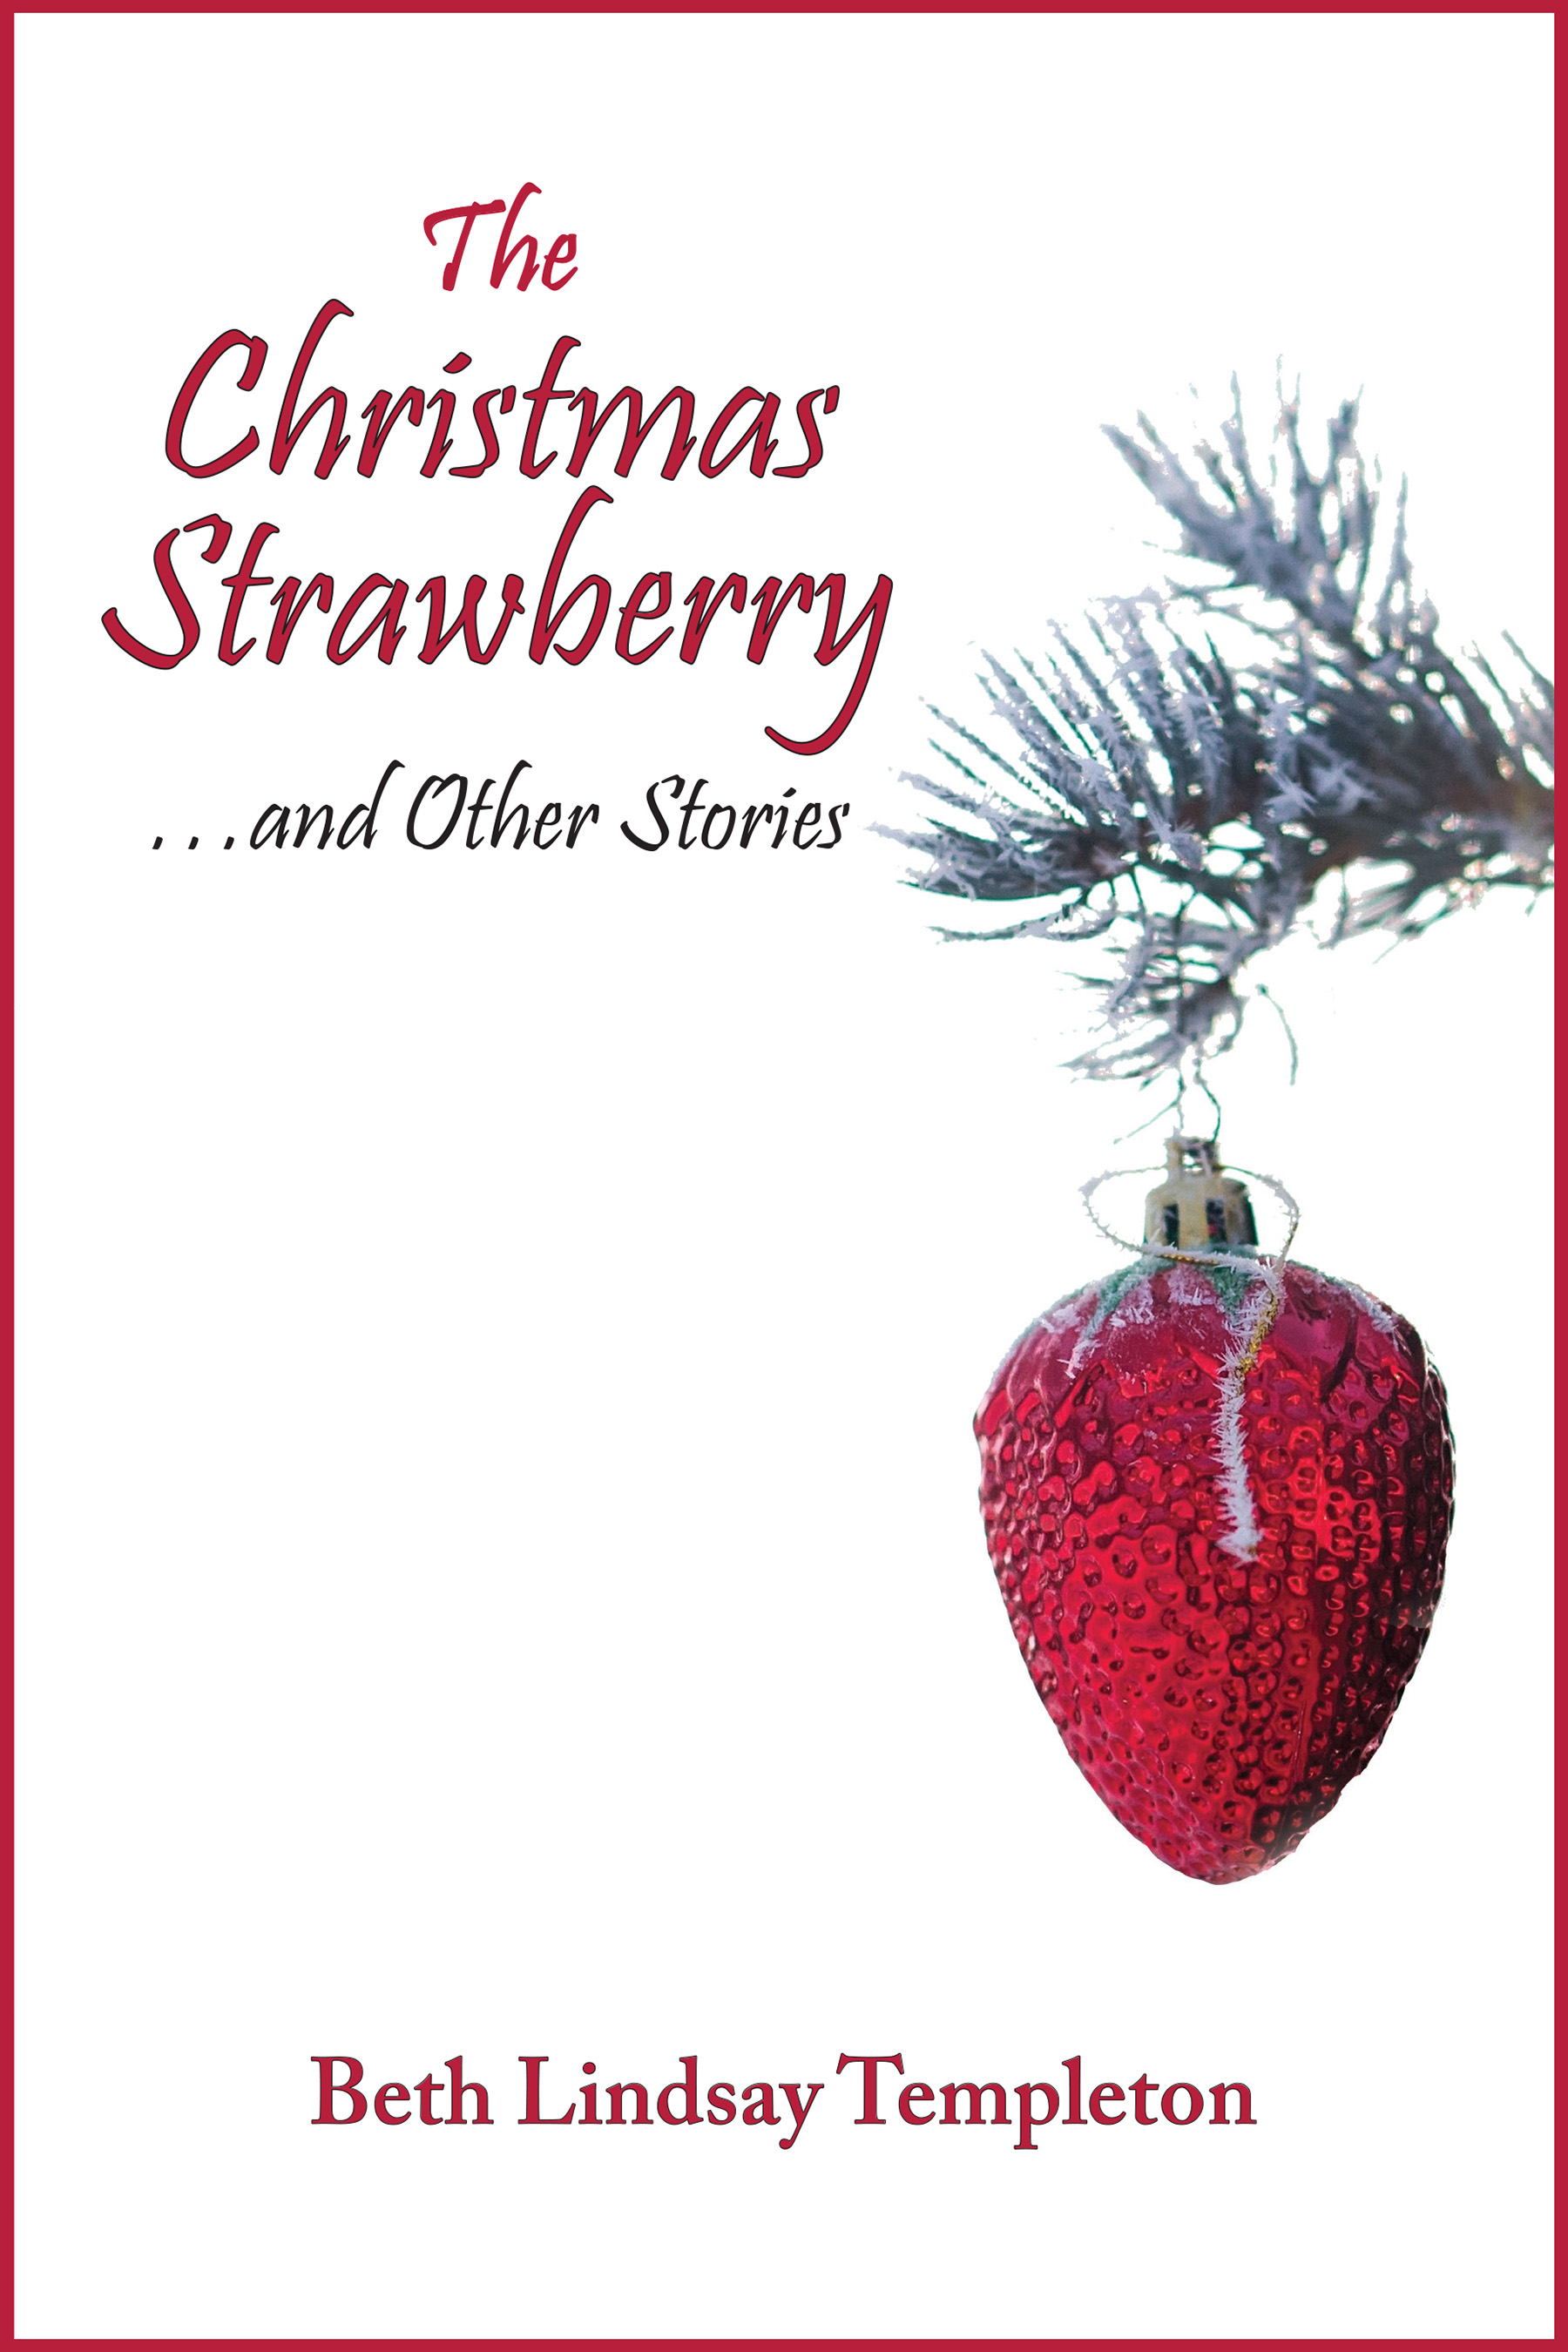 The Christmas Strawberry...and Other Stories